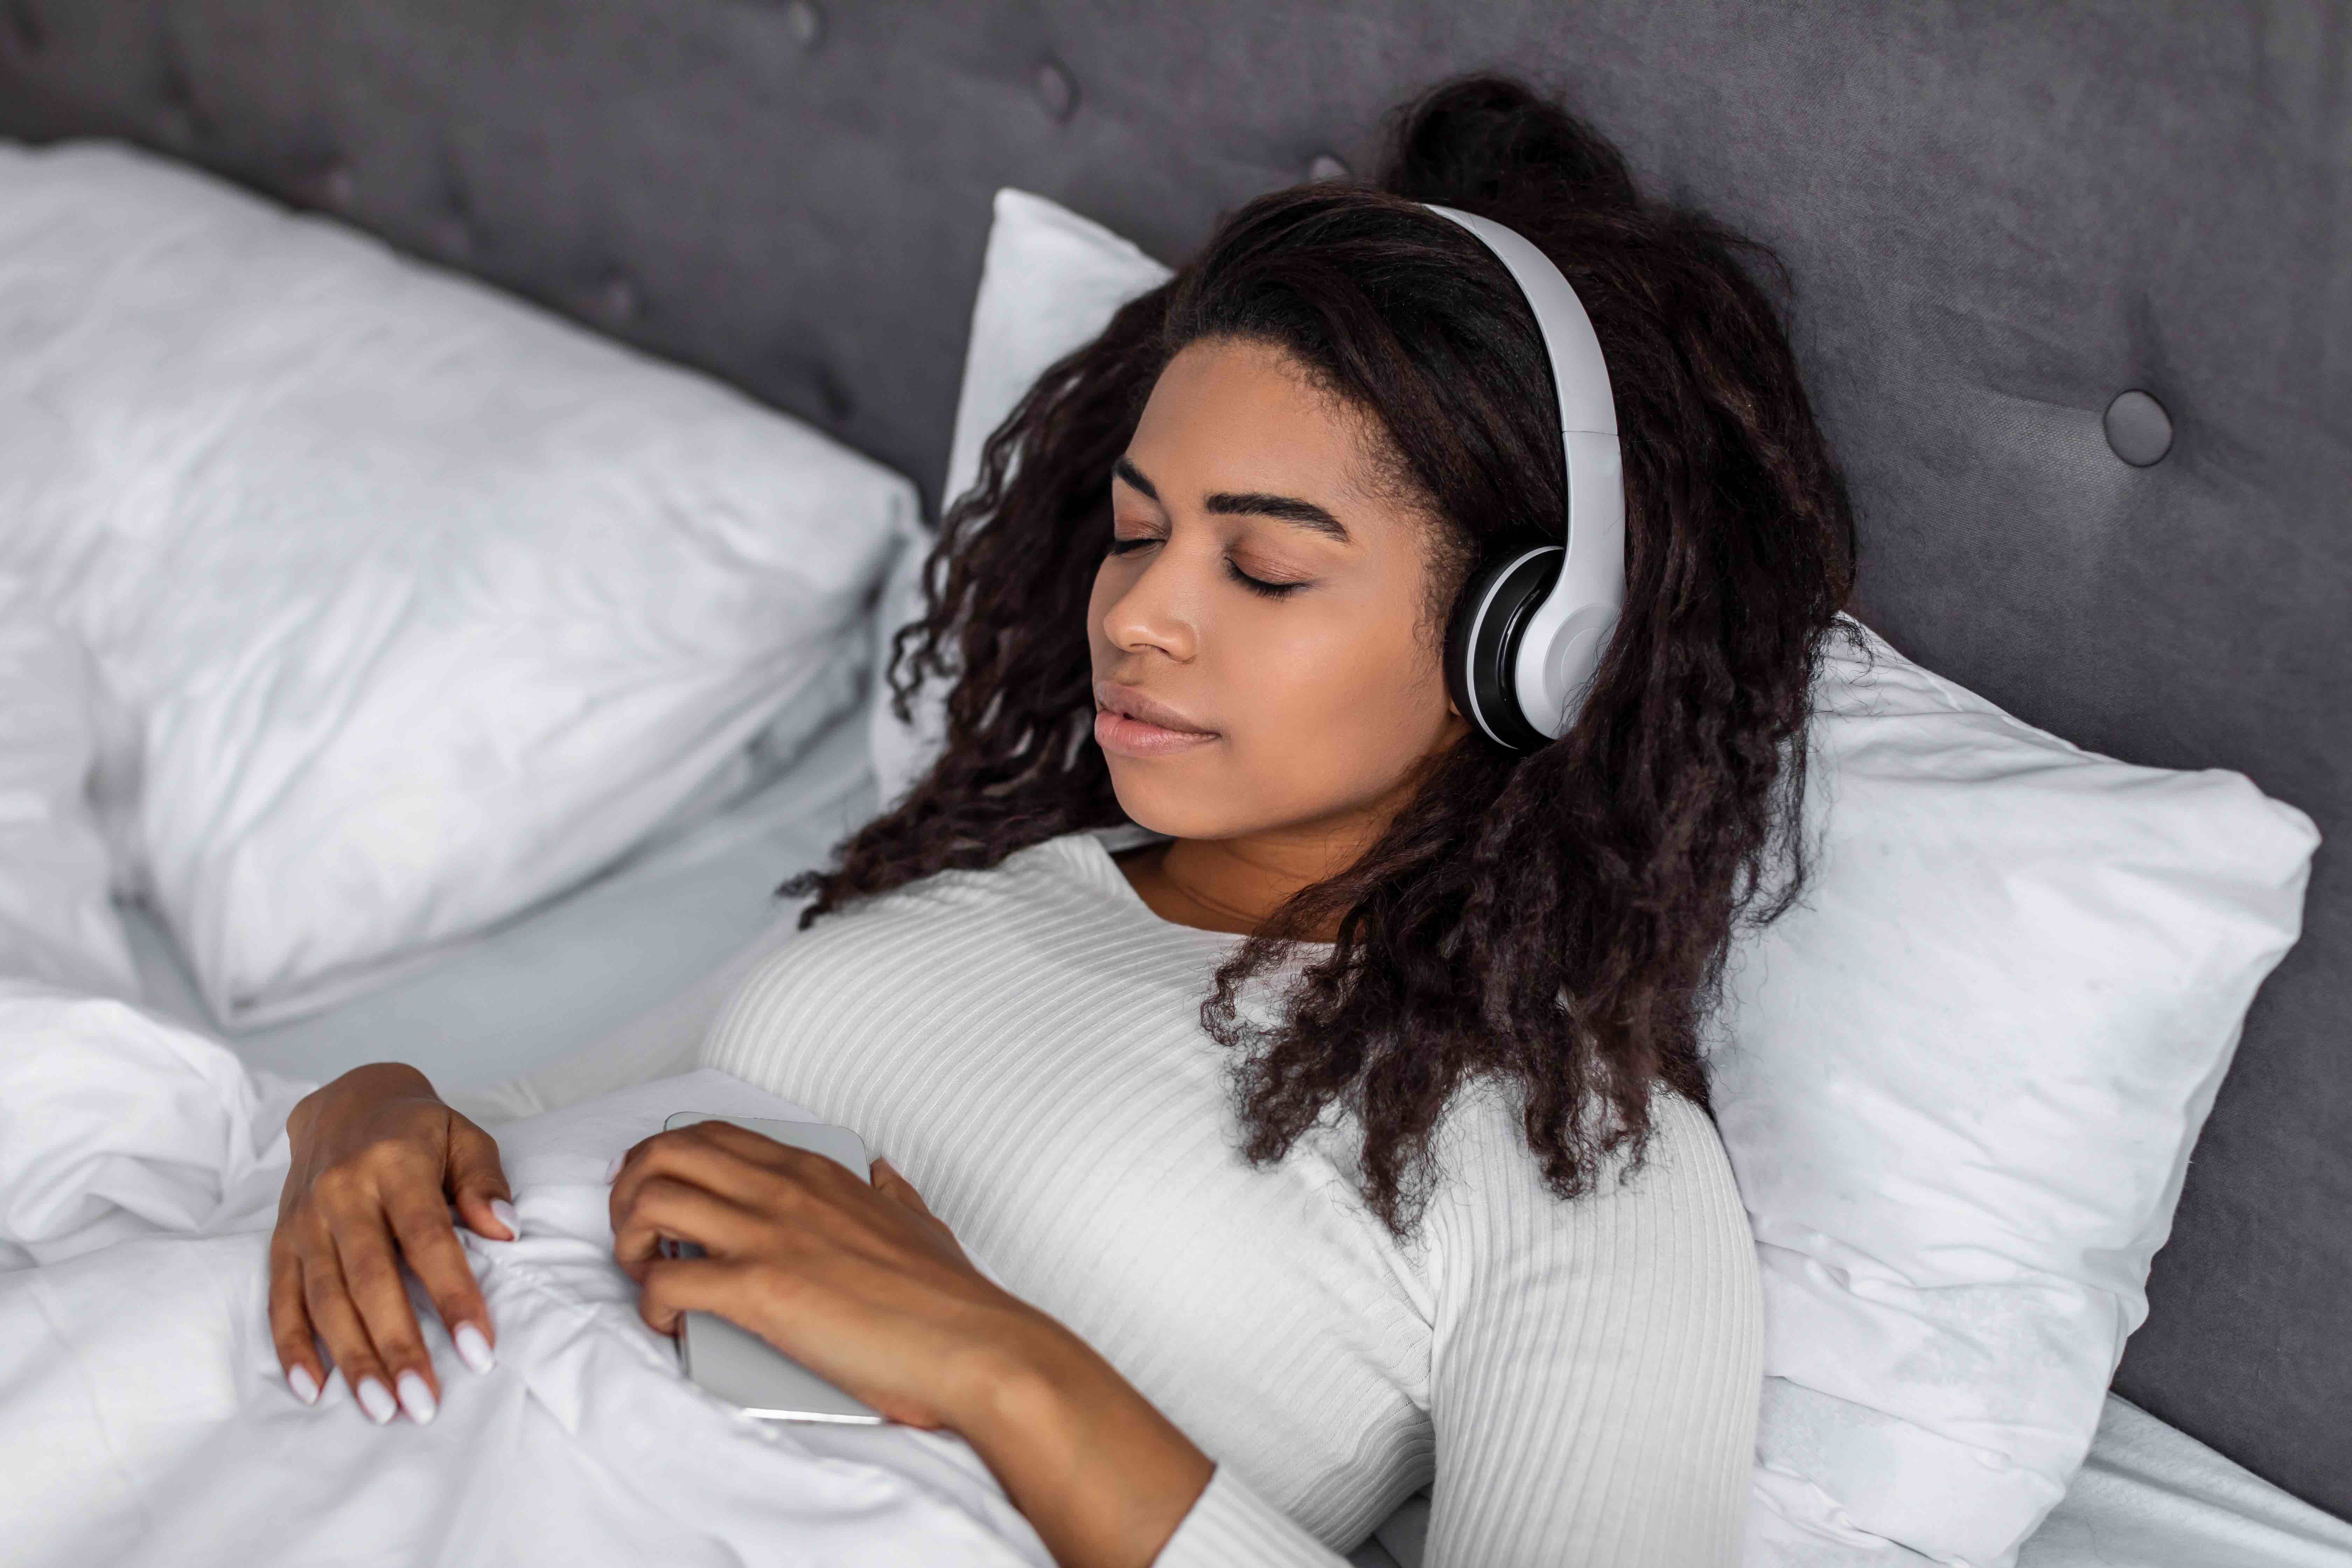 woman in bed listening to feed.fm music with headphones